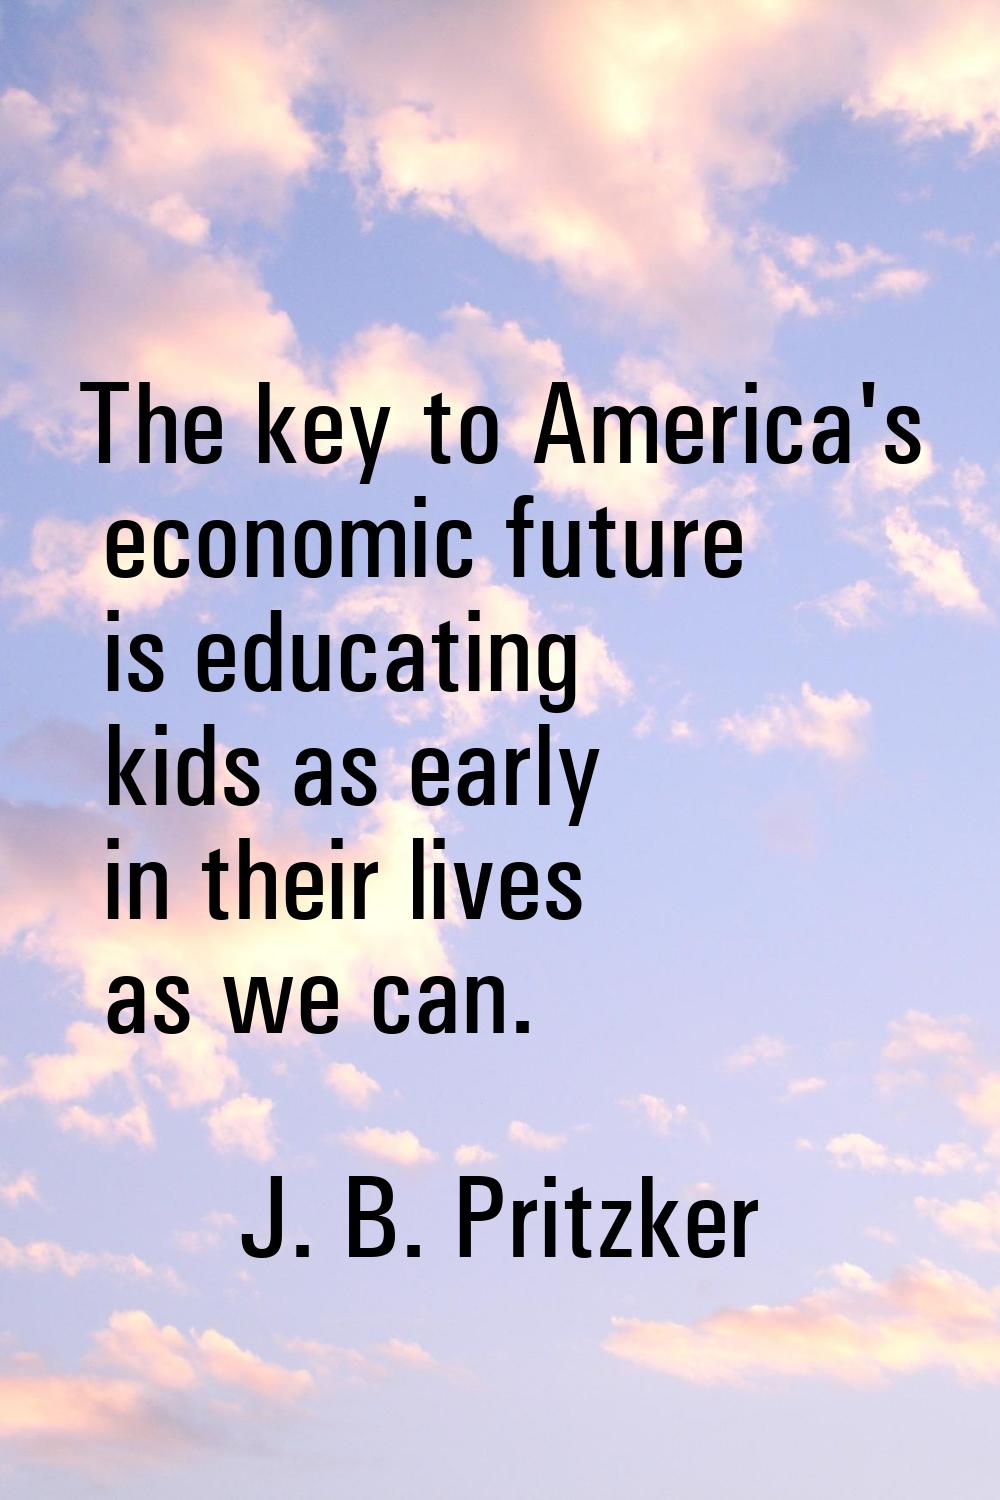 The key to America's economic future is educating kids as early in their lives as we can.